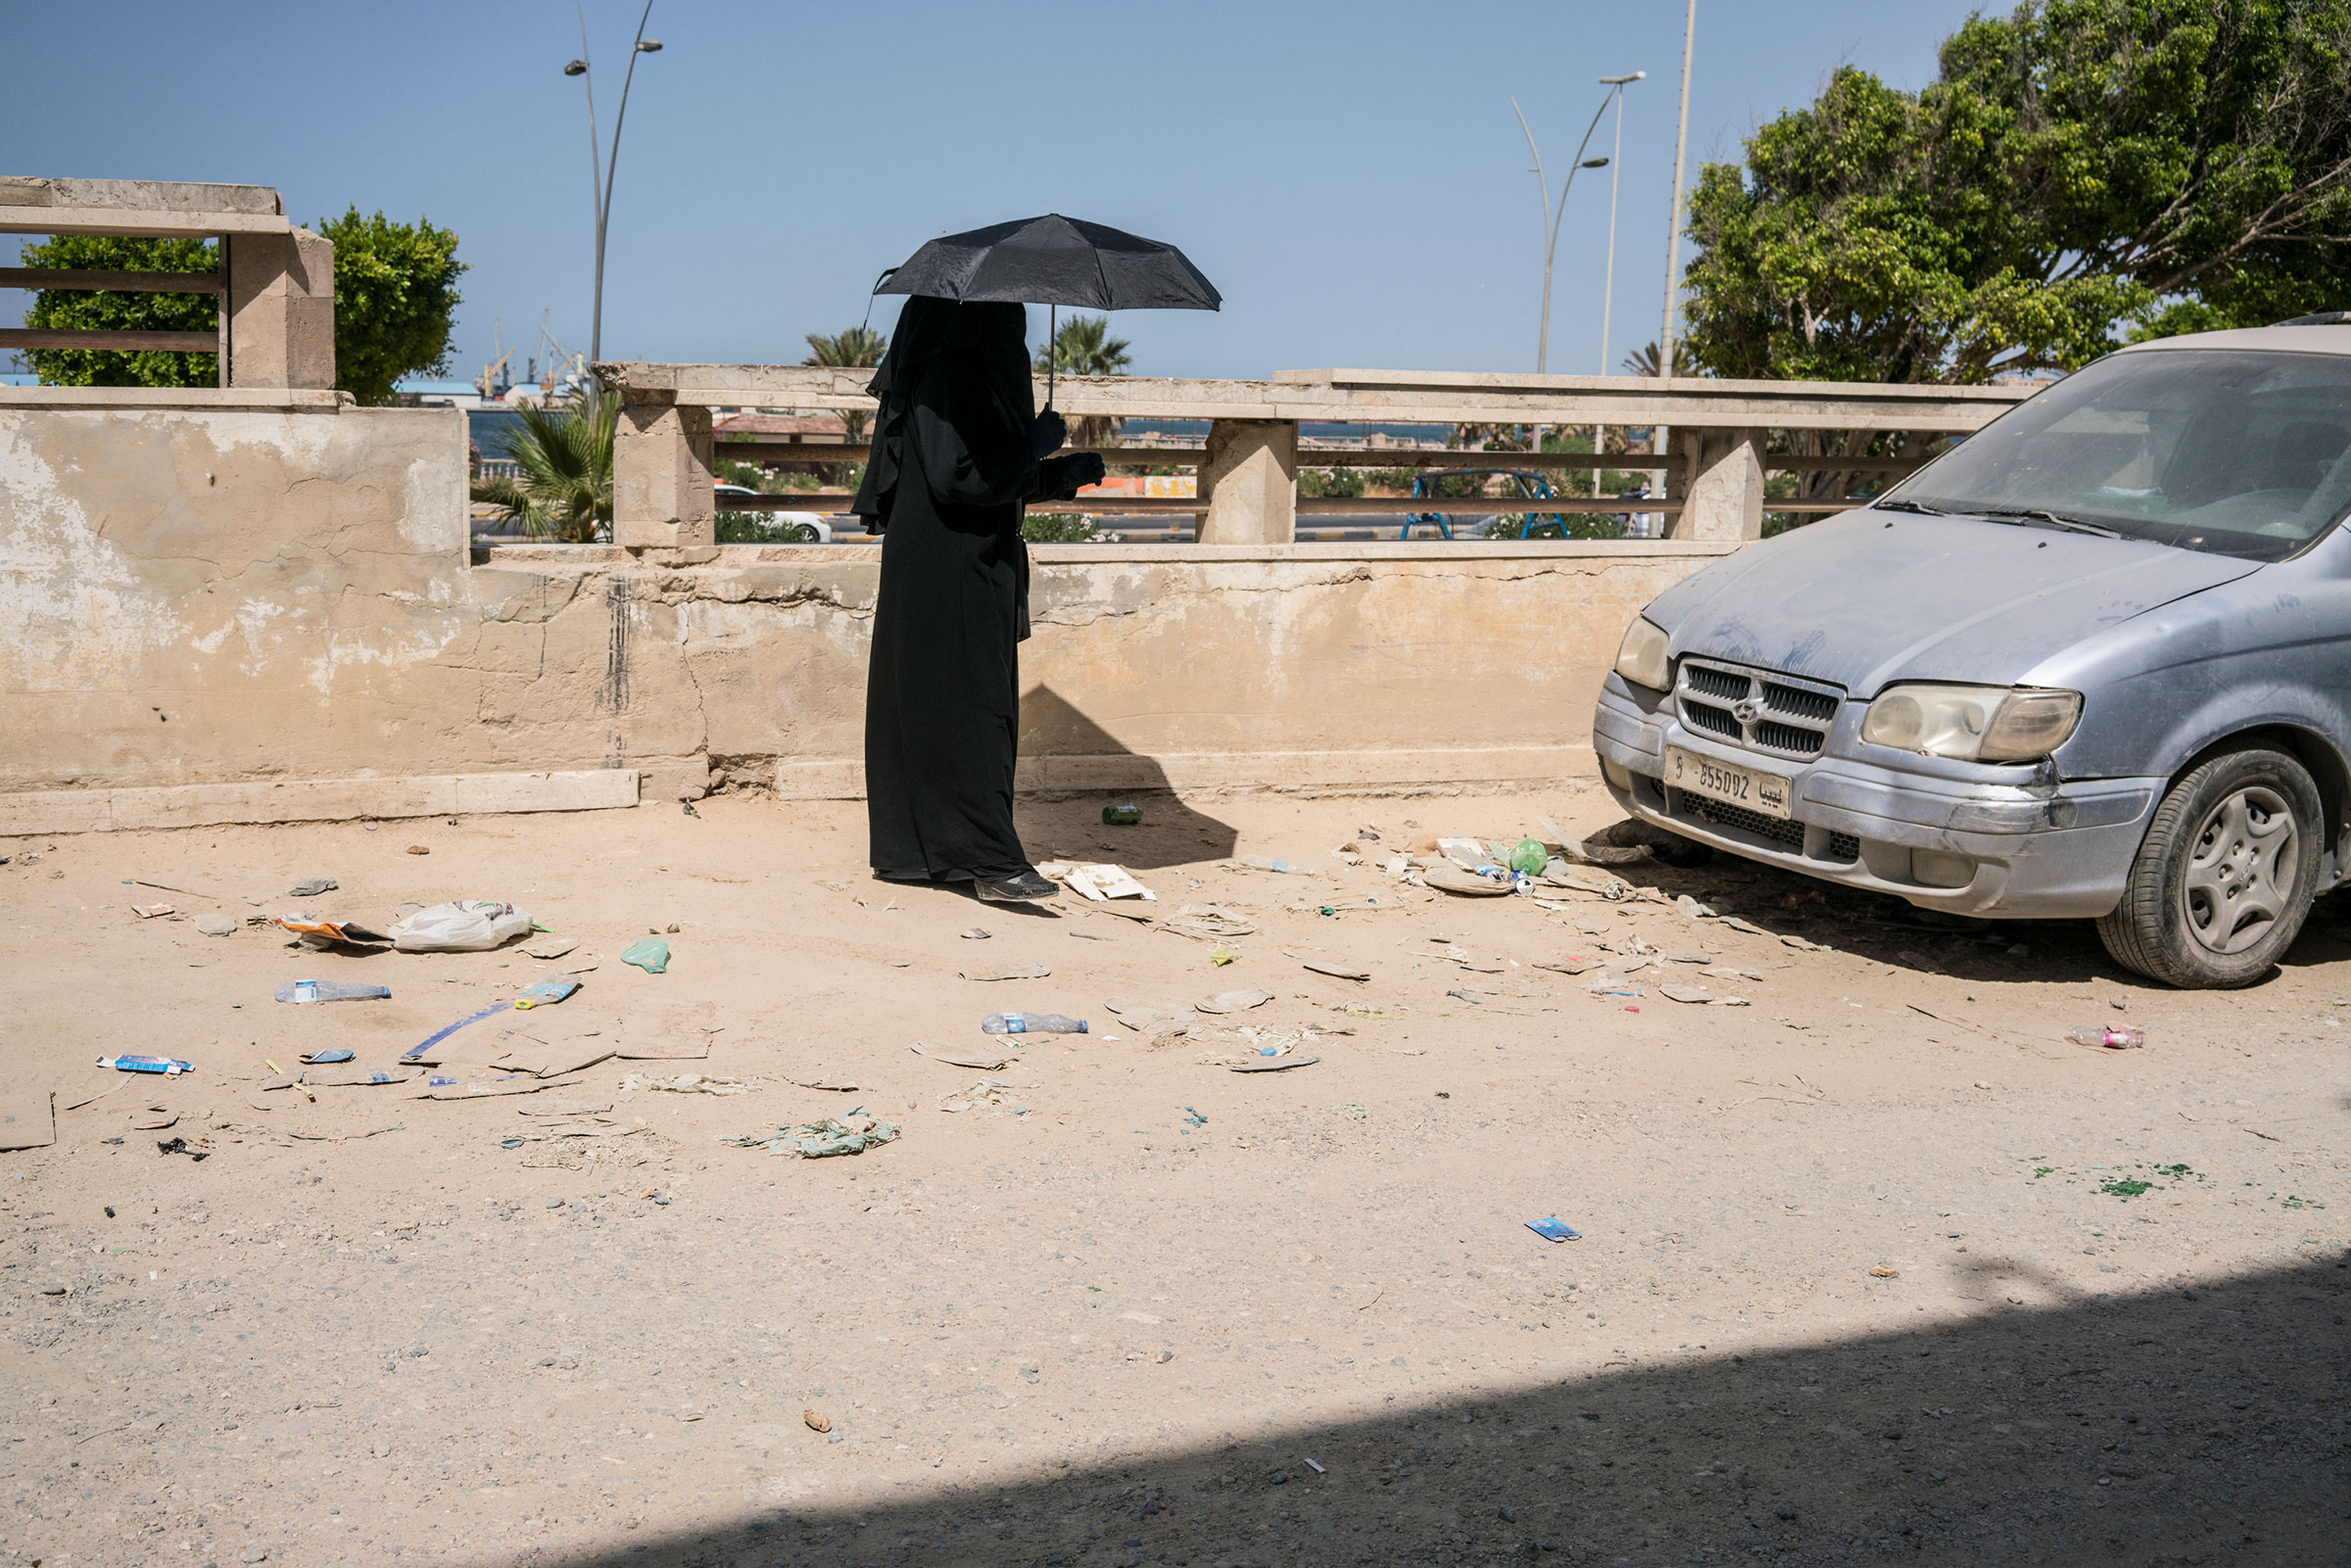 A woman on a road near the old city in Tripoli on July 5, 2019. (Emanuele Satolli)